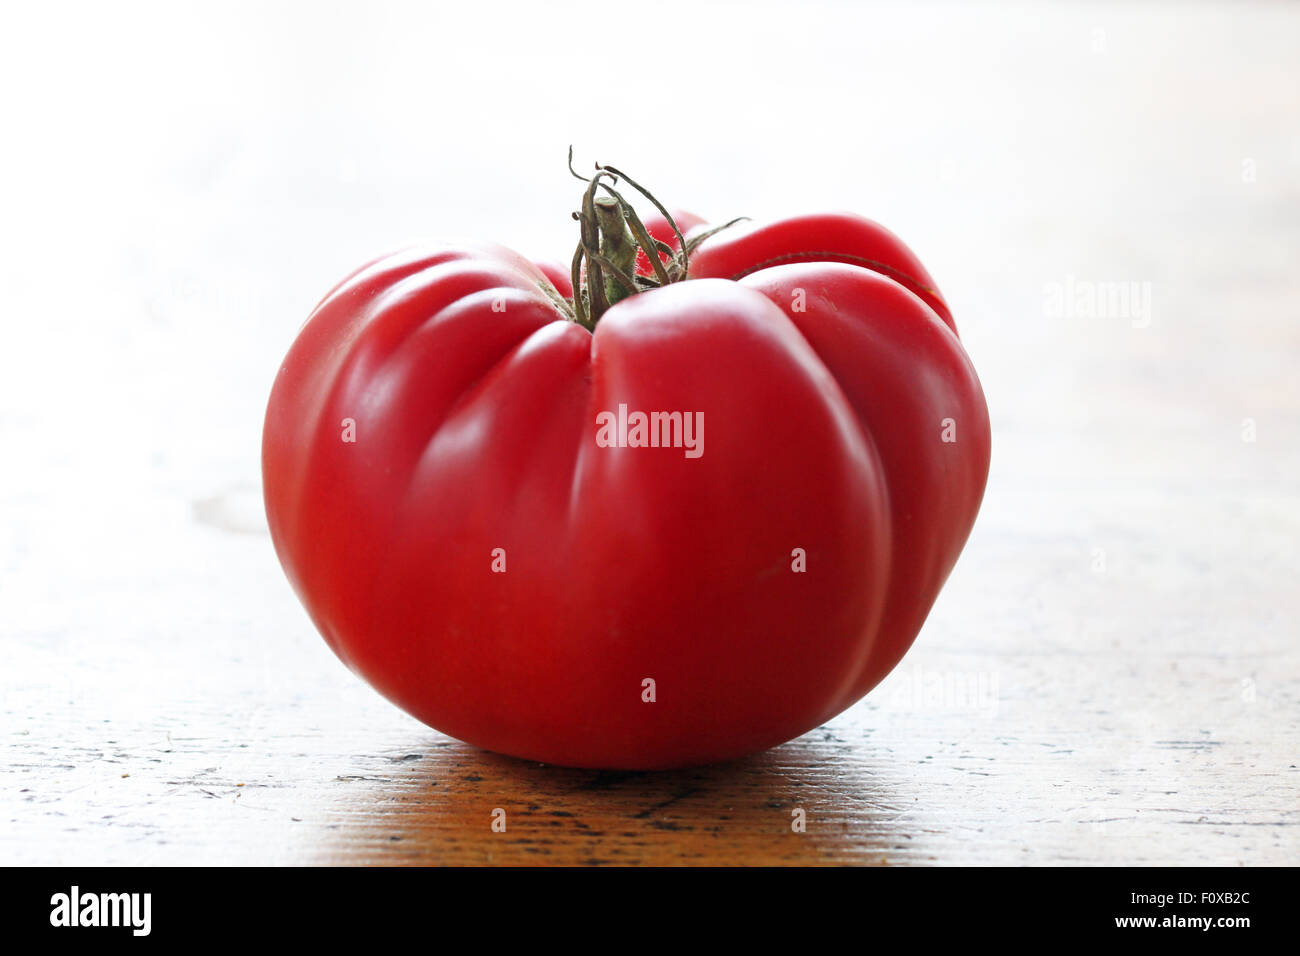 Big heirloom tomato on white Banque D'Images